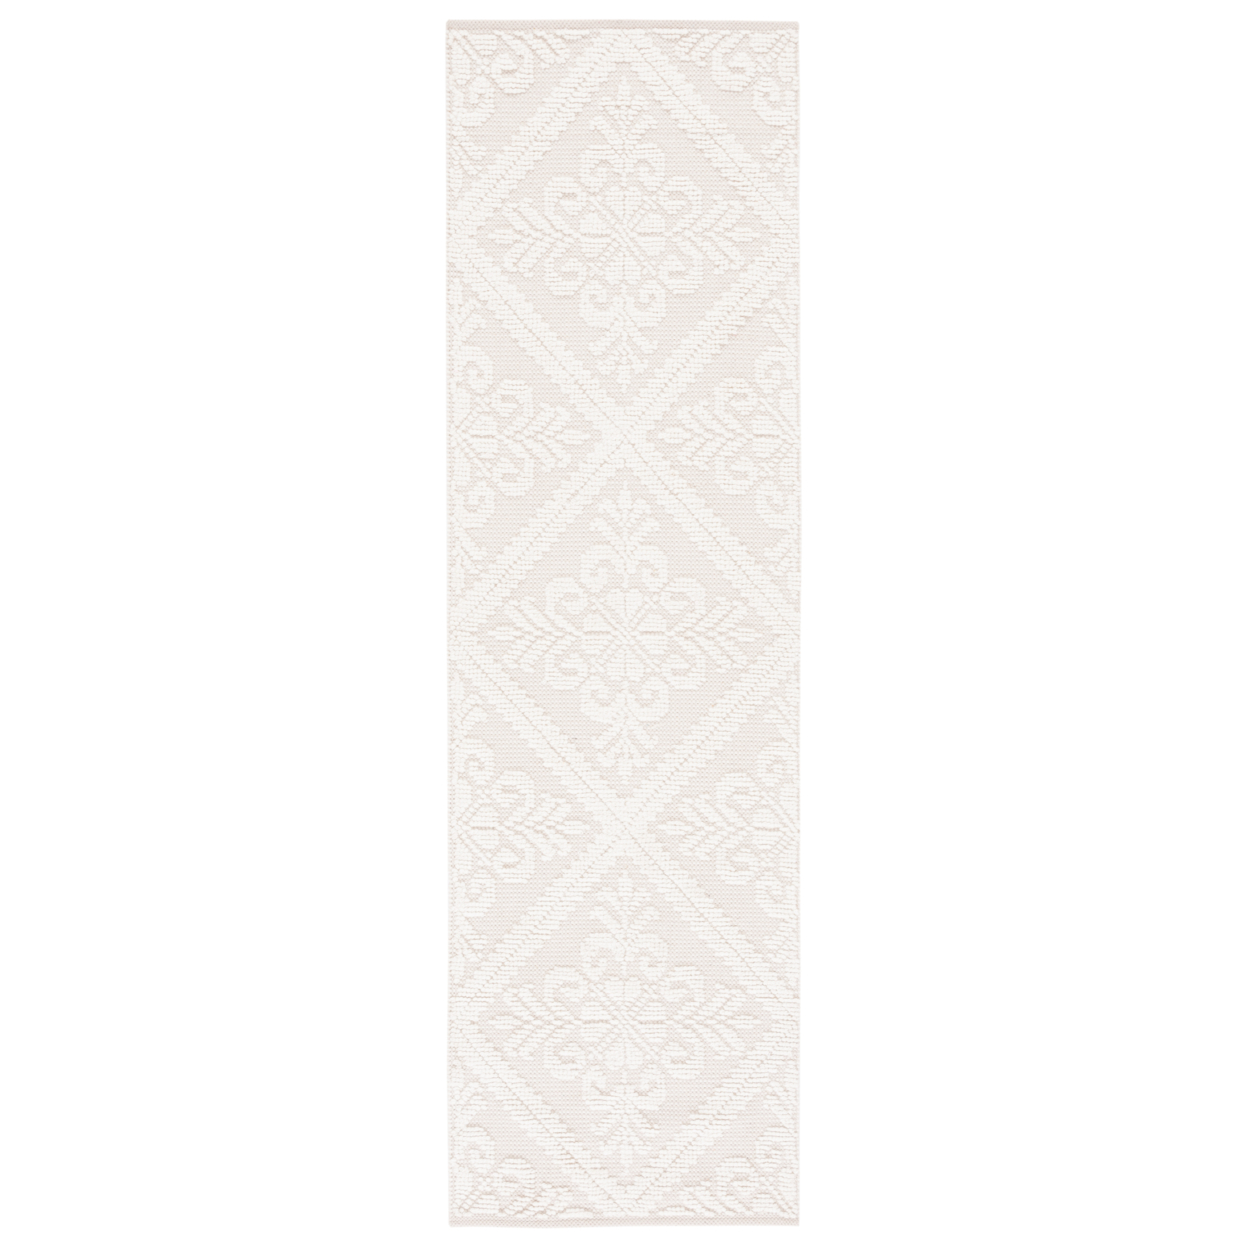 SAFAVIEH Vermont Collection VRM101A Handwoven Ivory Rug - 6 X 9